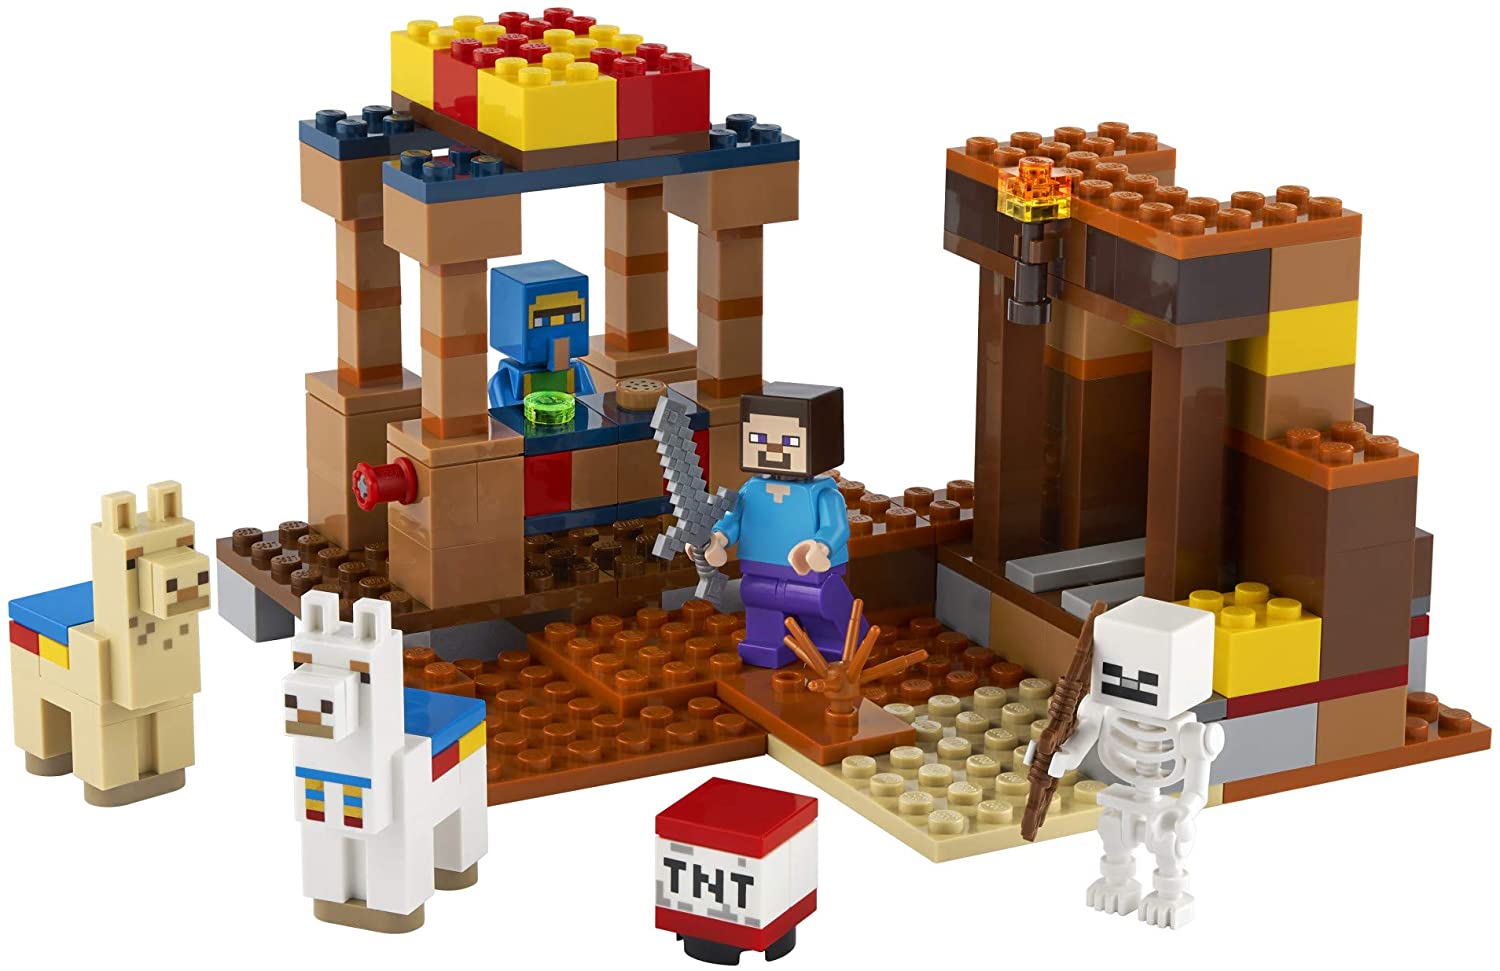 LEGO Minecraft The Trading Post 21167